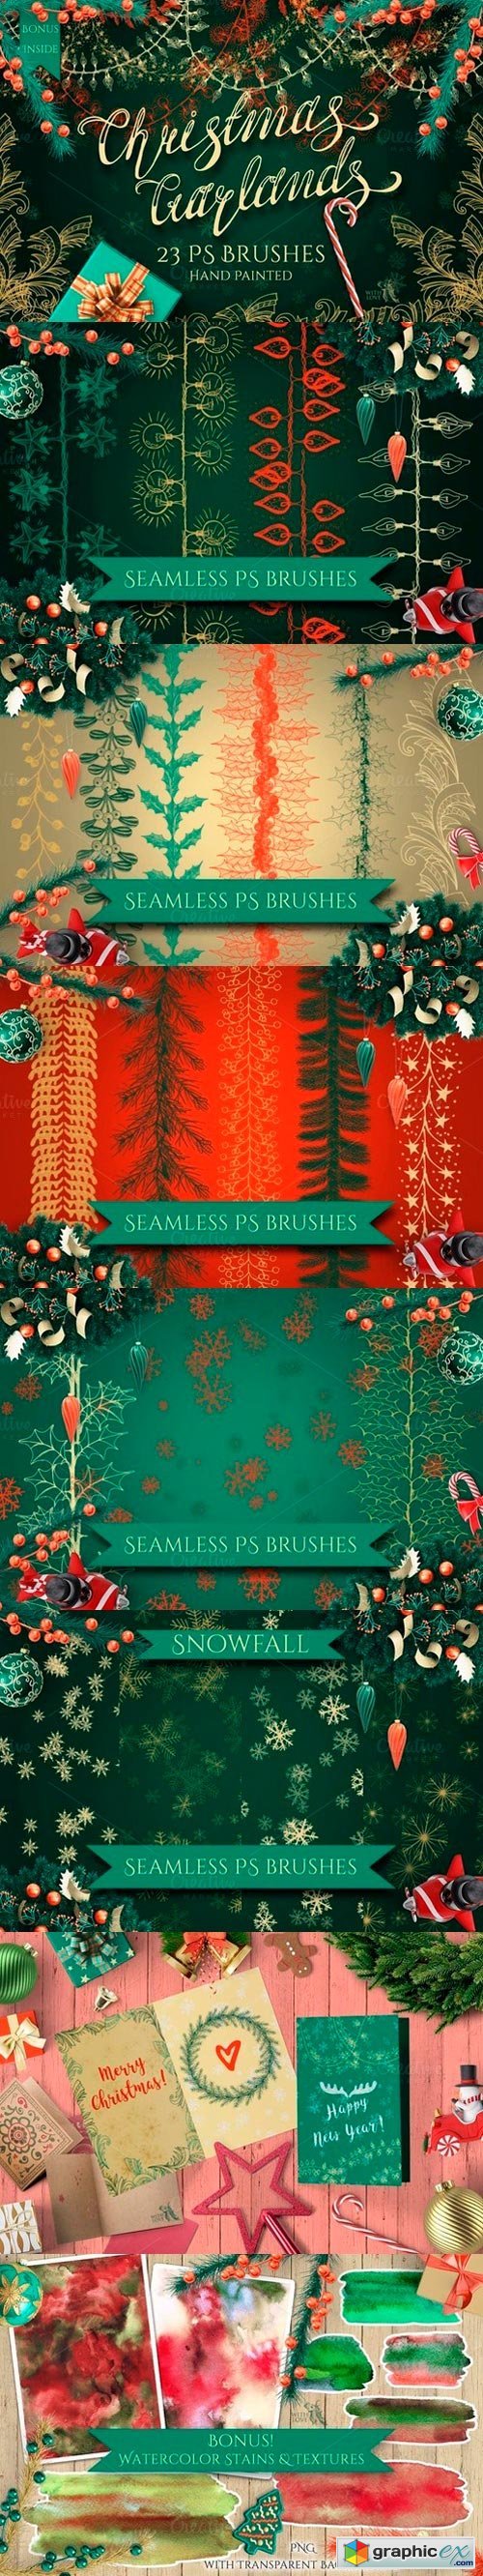 Christmas Garlands PS Brushes